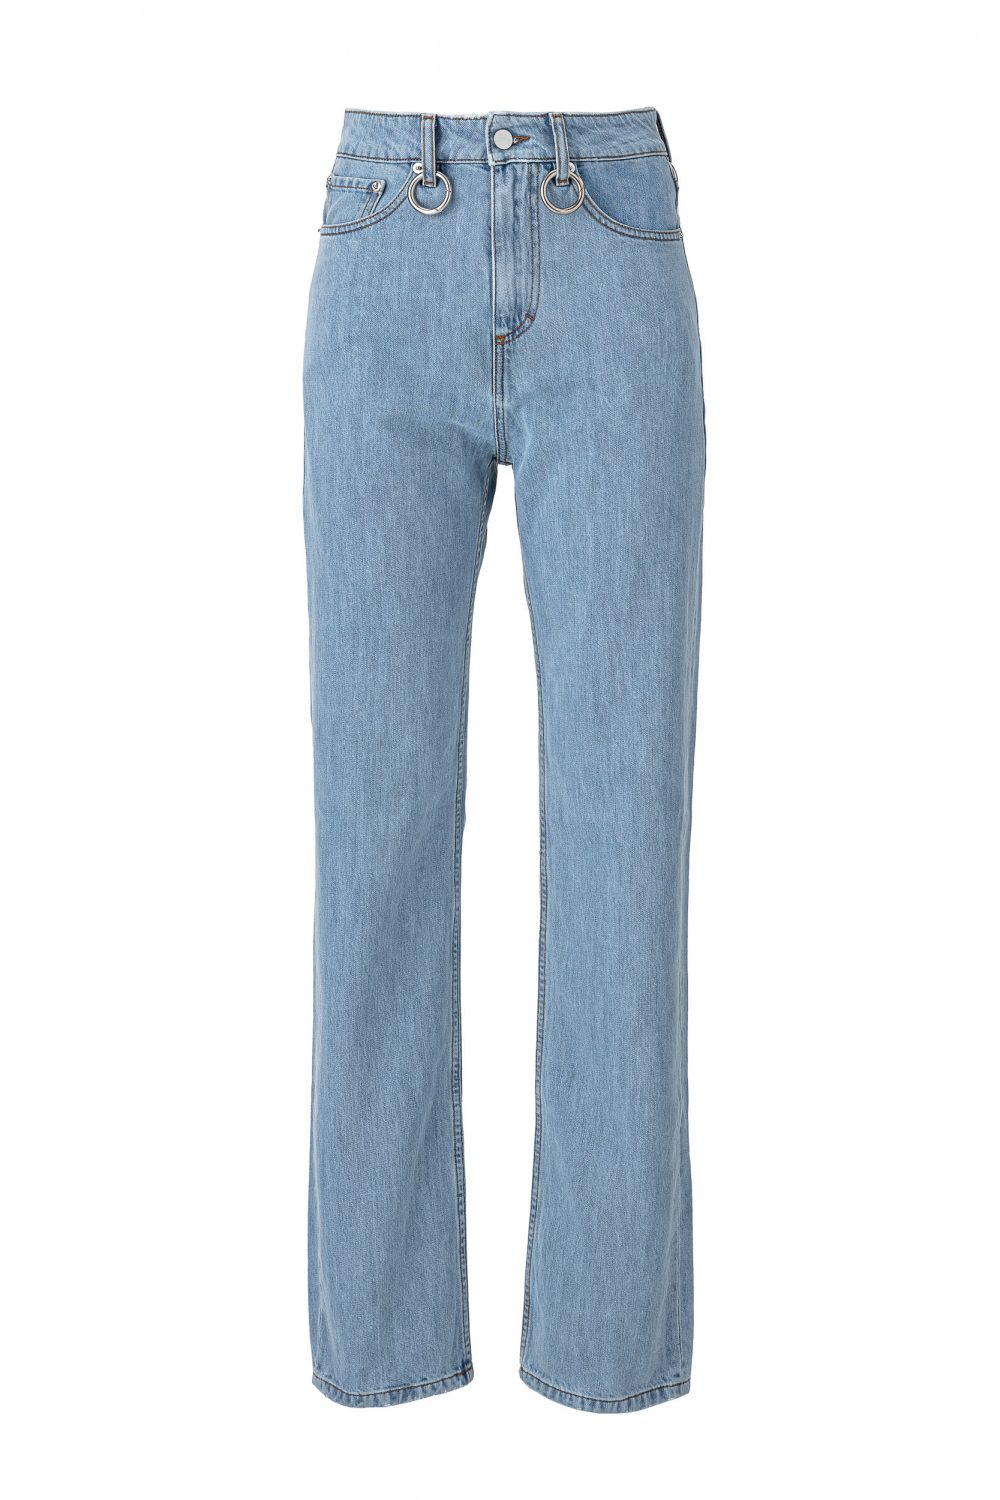 Light Blue Jeans with Rings